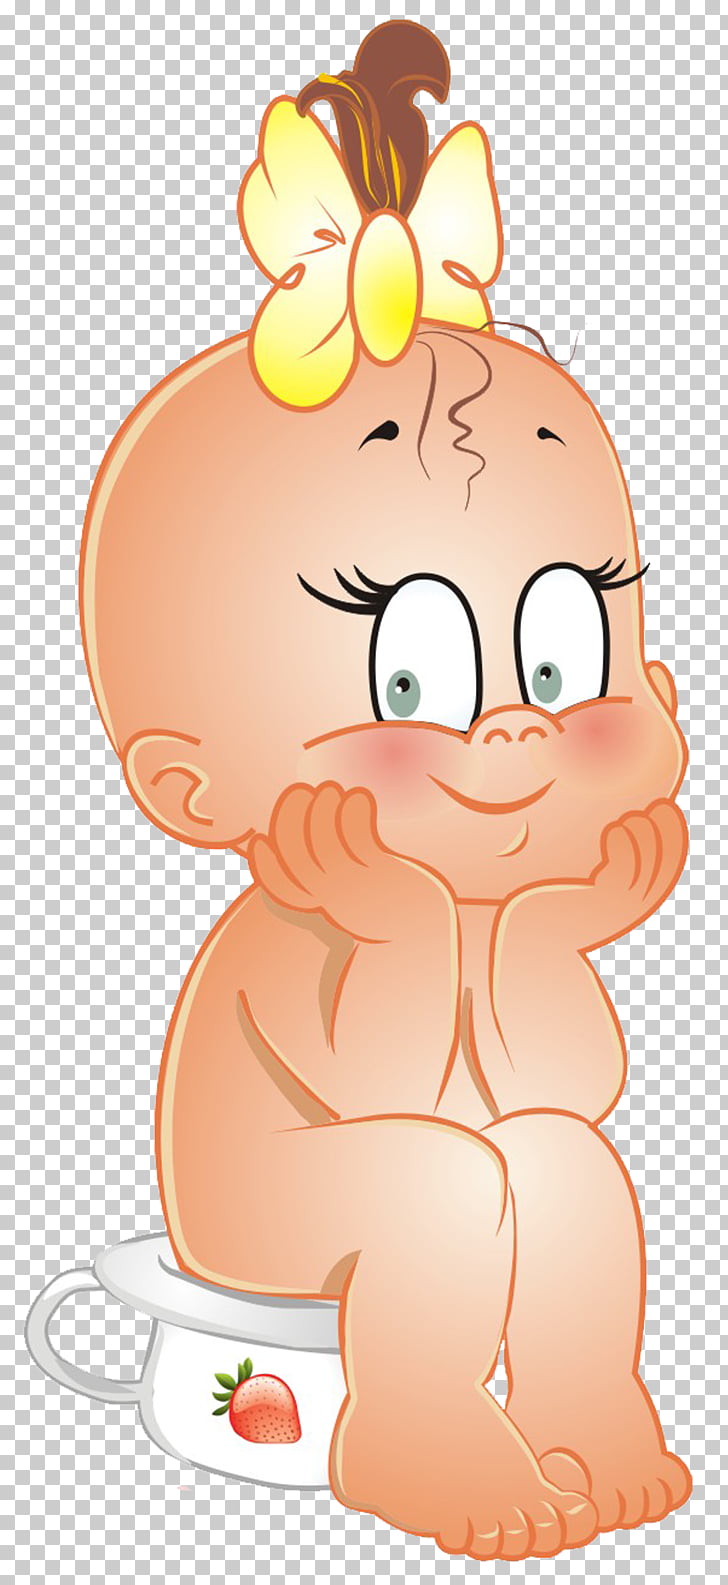 free baby clipart yellow